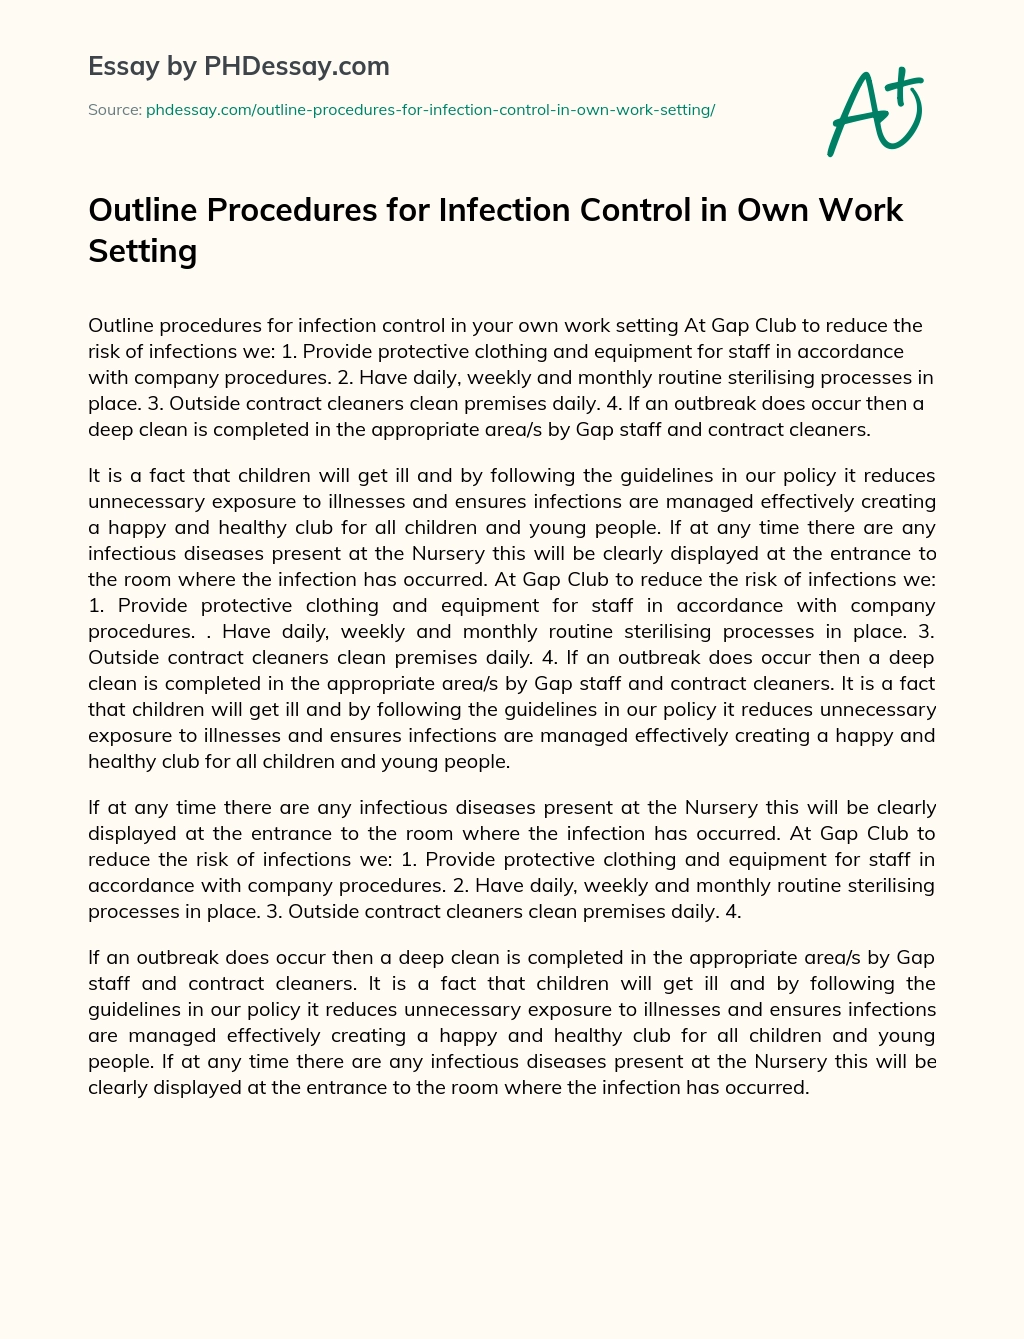 Outline Procedures for Infection Control in Own Work Setting essay